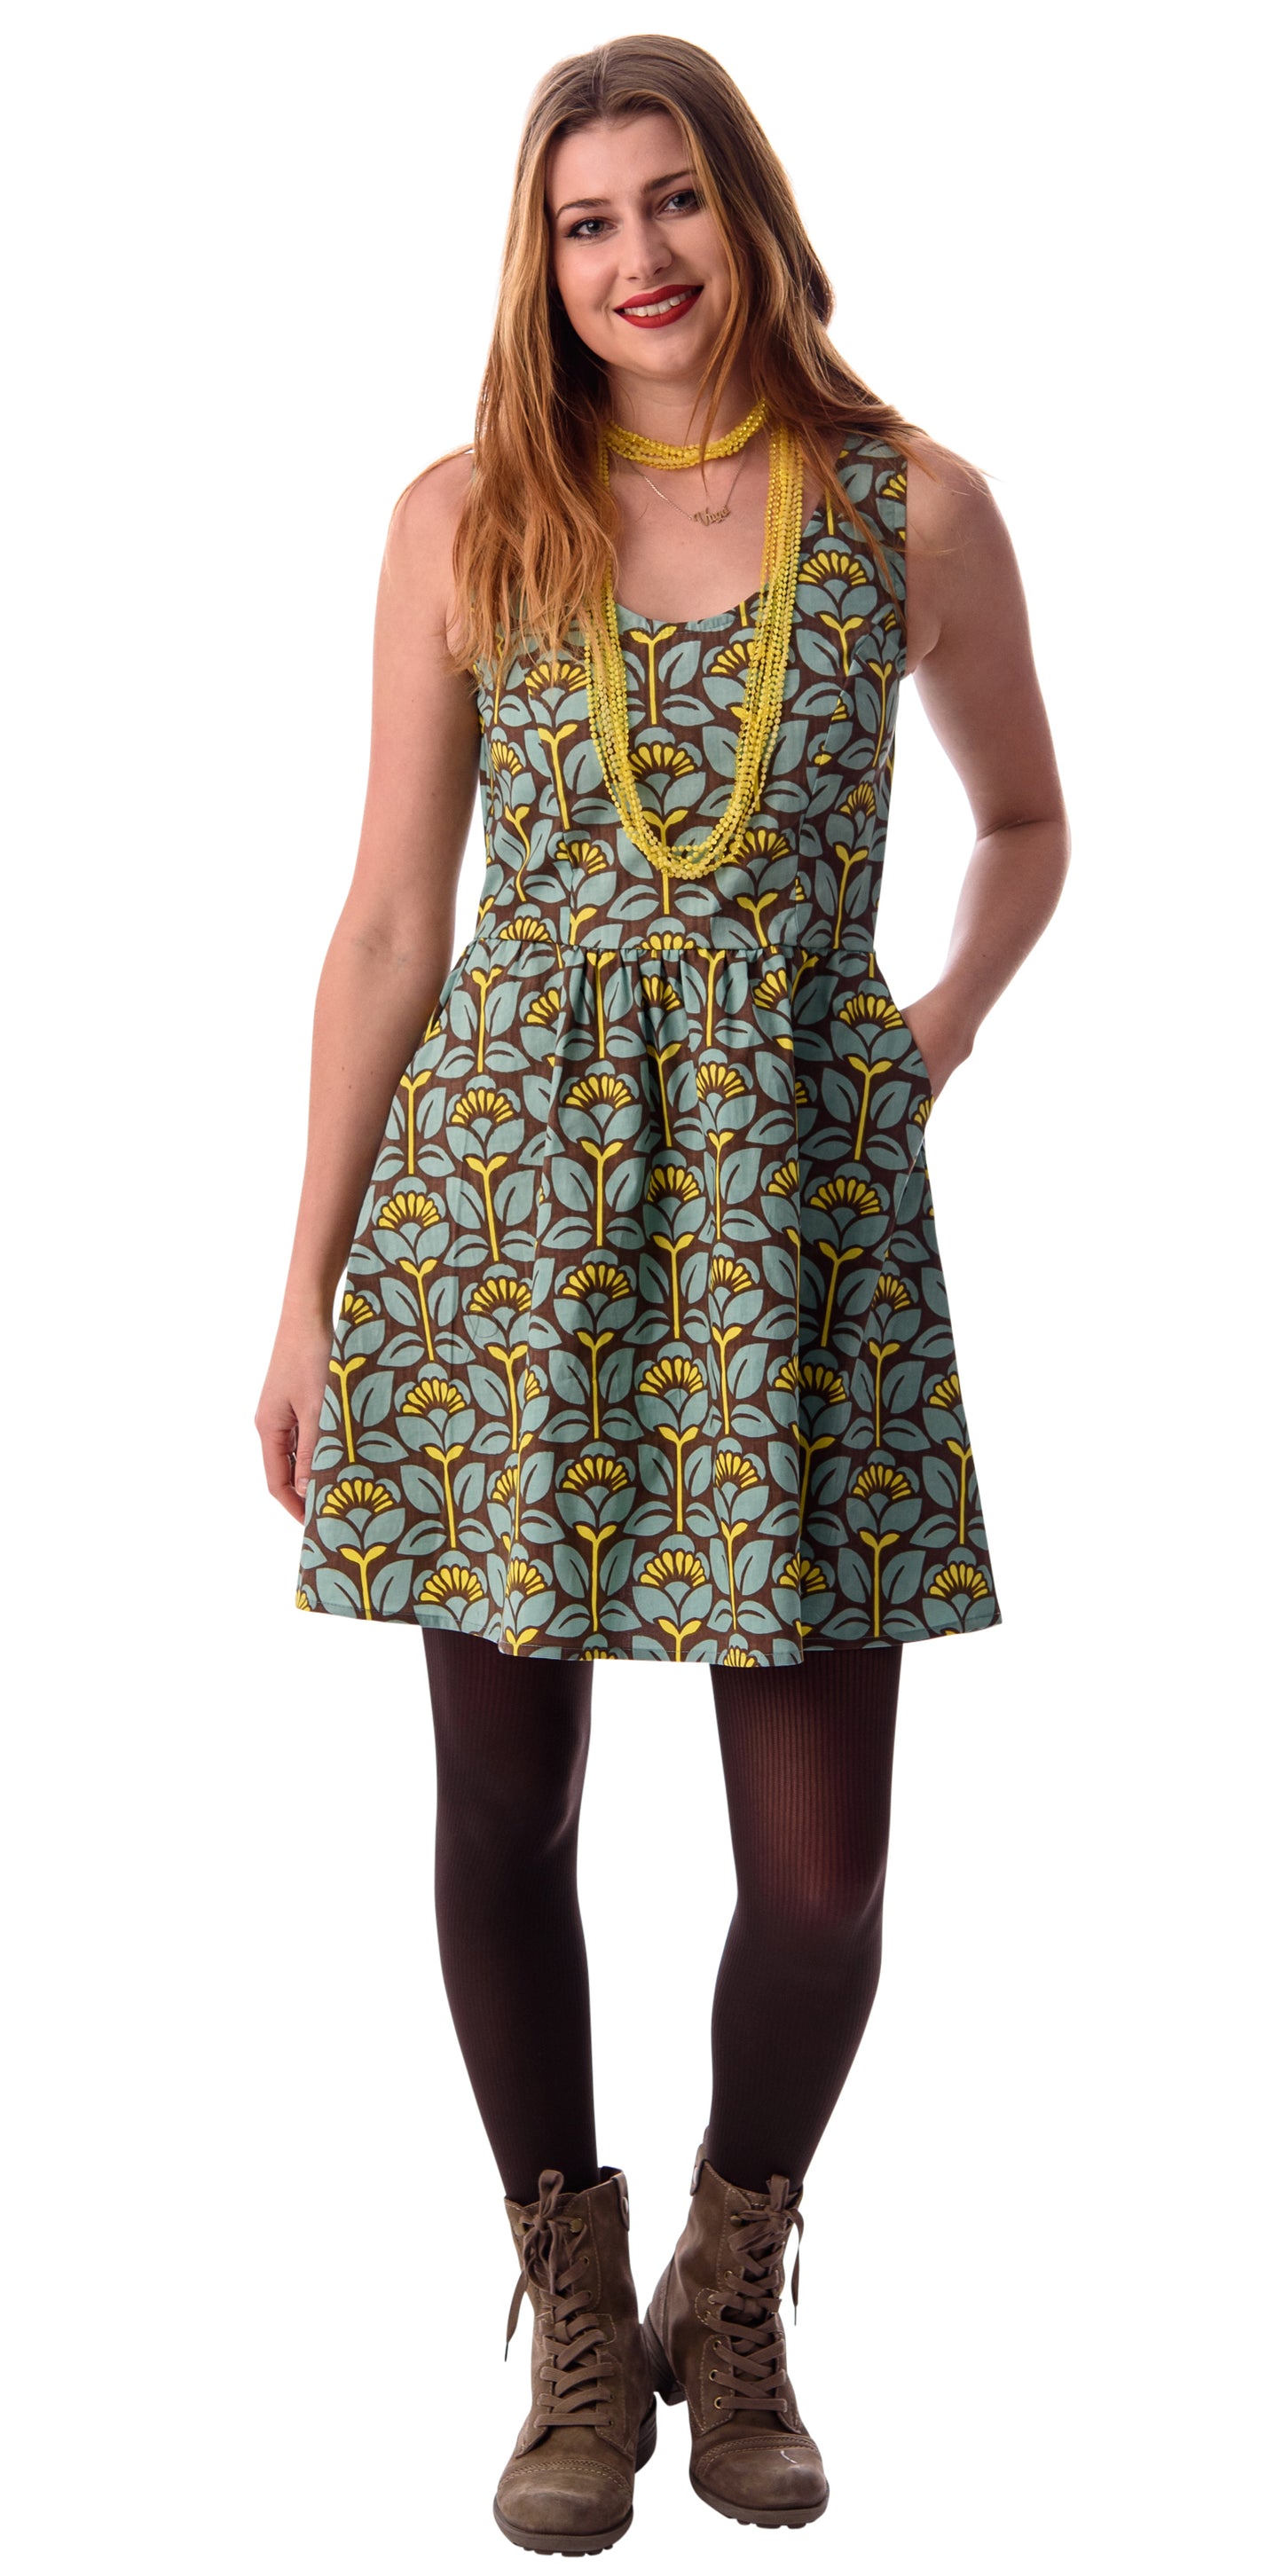 Light blue, yellow and brown geometric floral retro print sleeveless fit and flare short dress